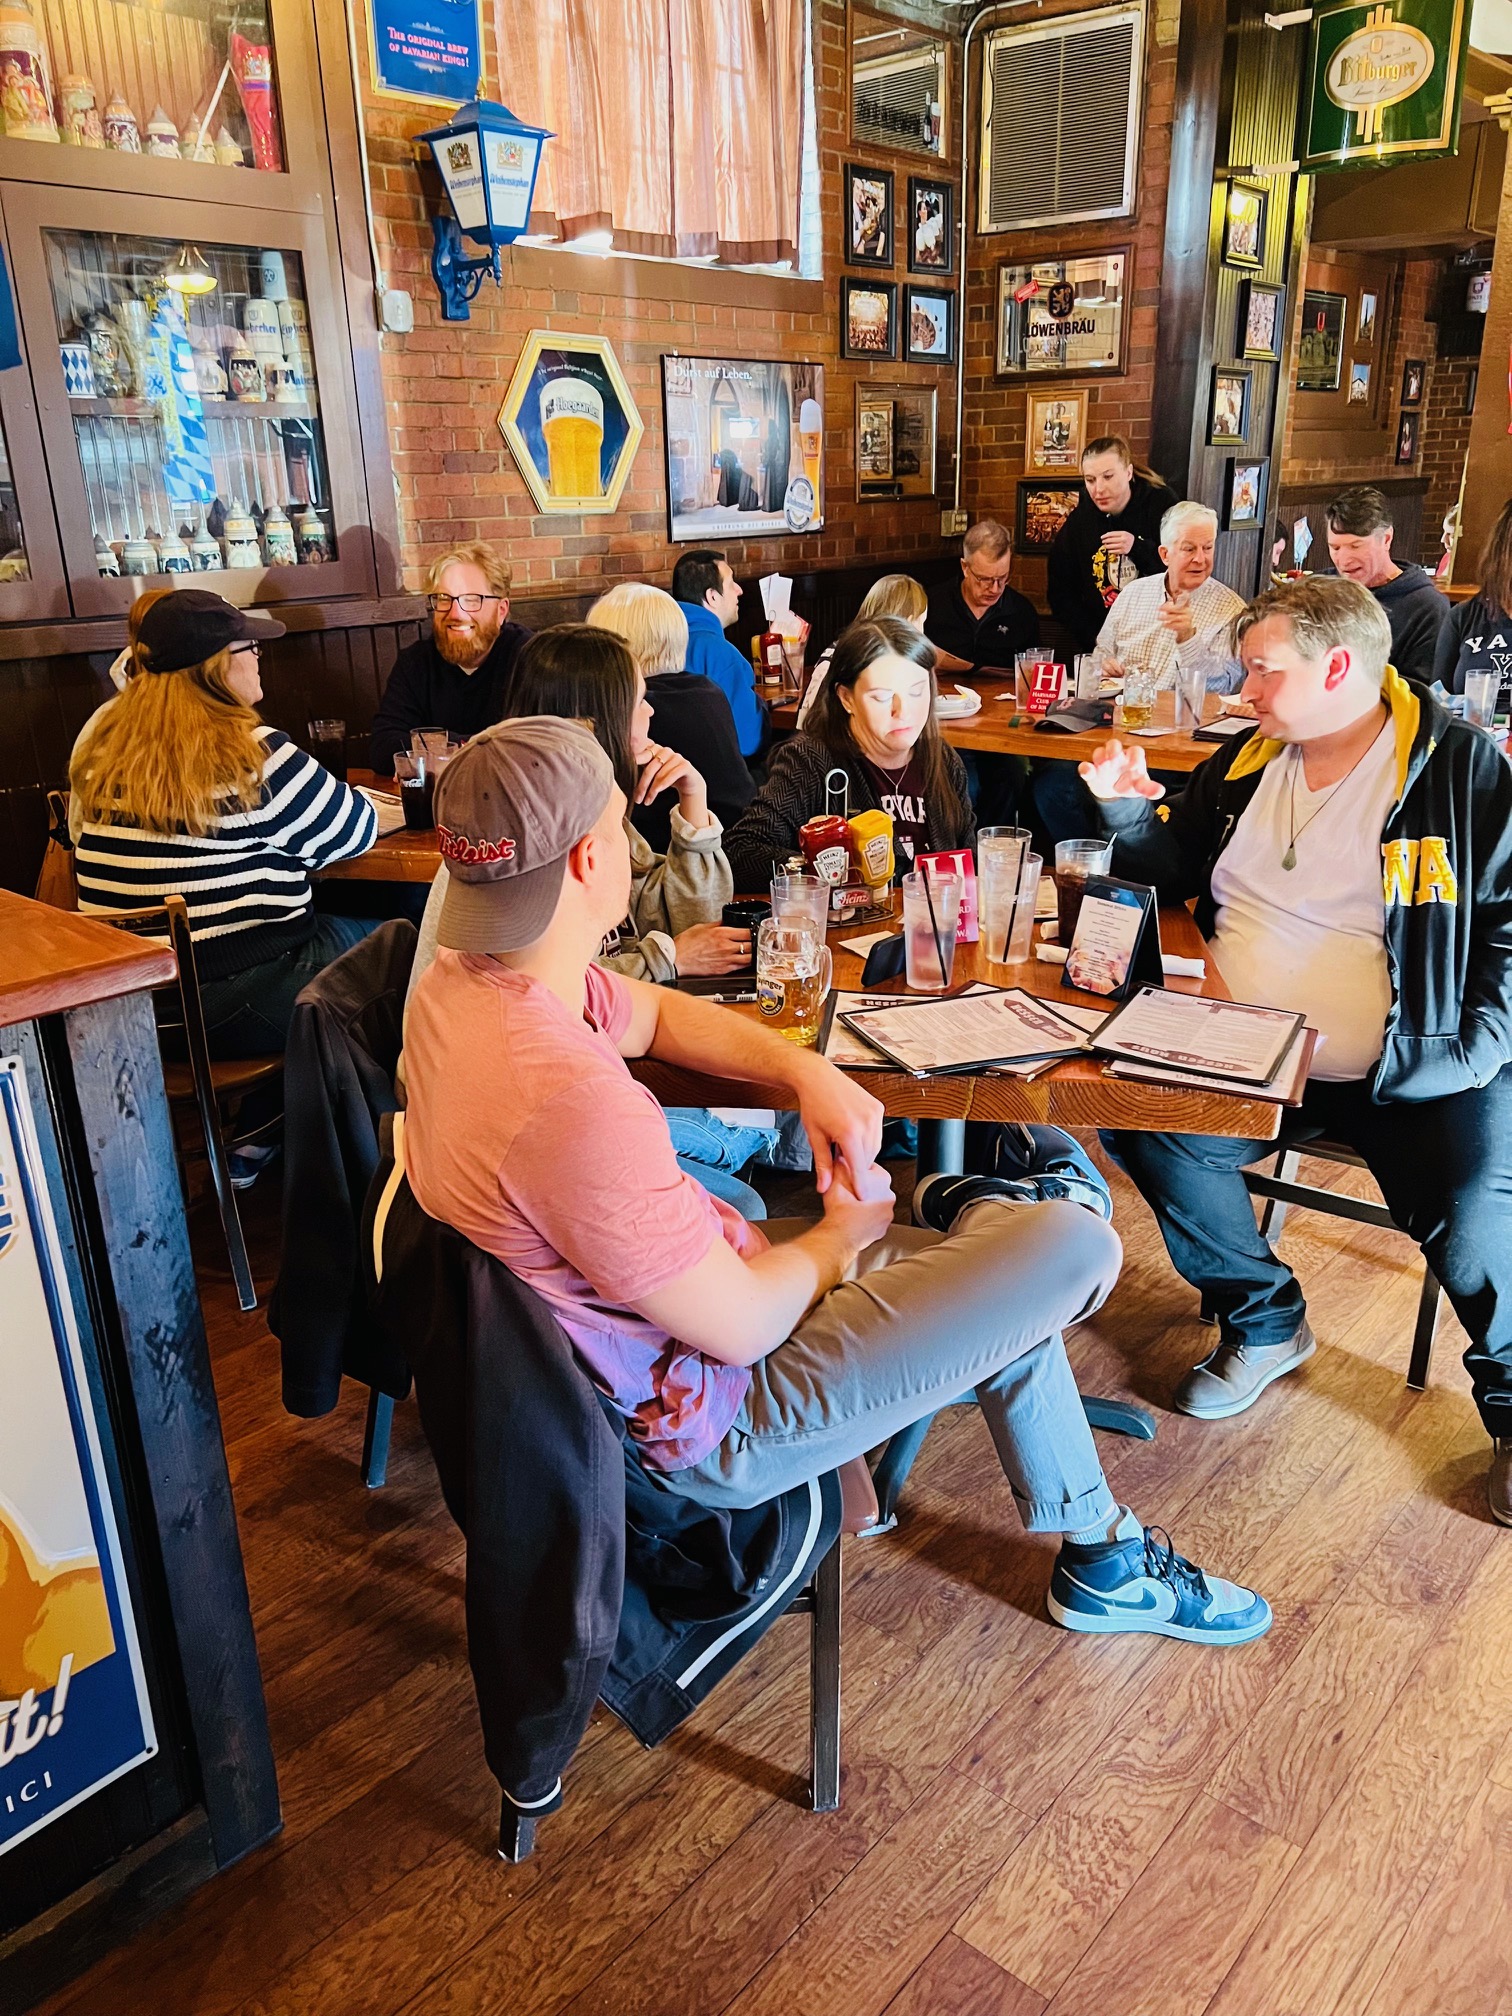 Harvard Club of Iowa members sitting together and chatting in a bar